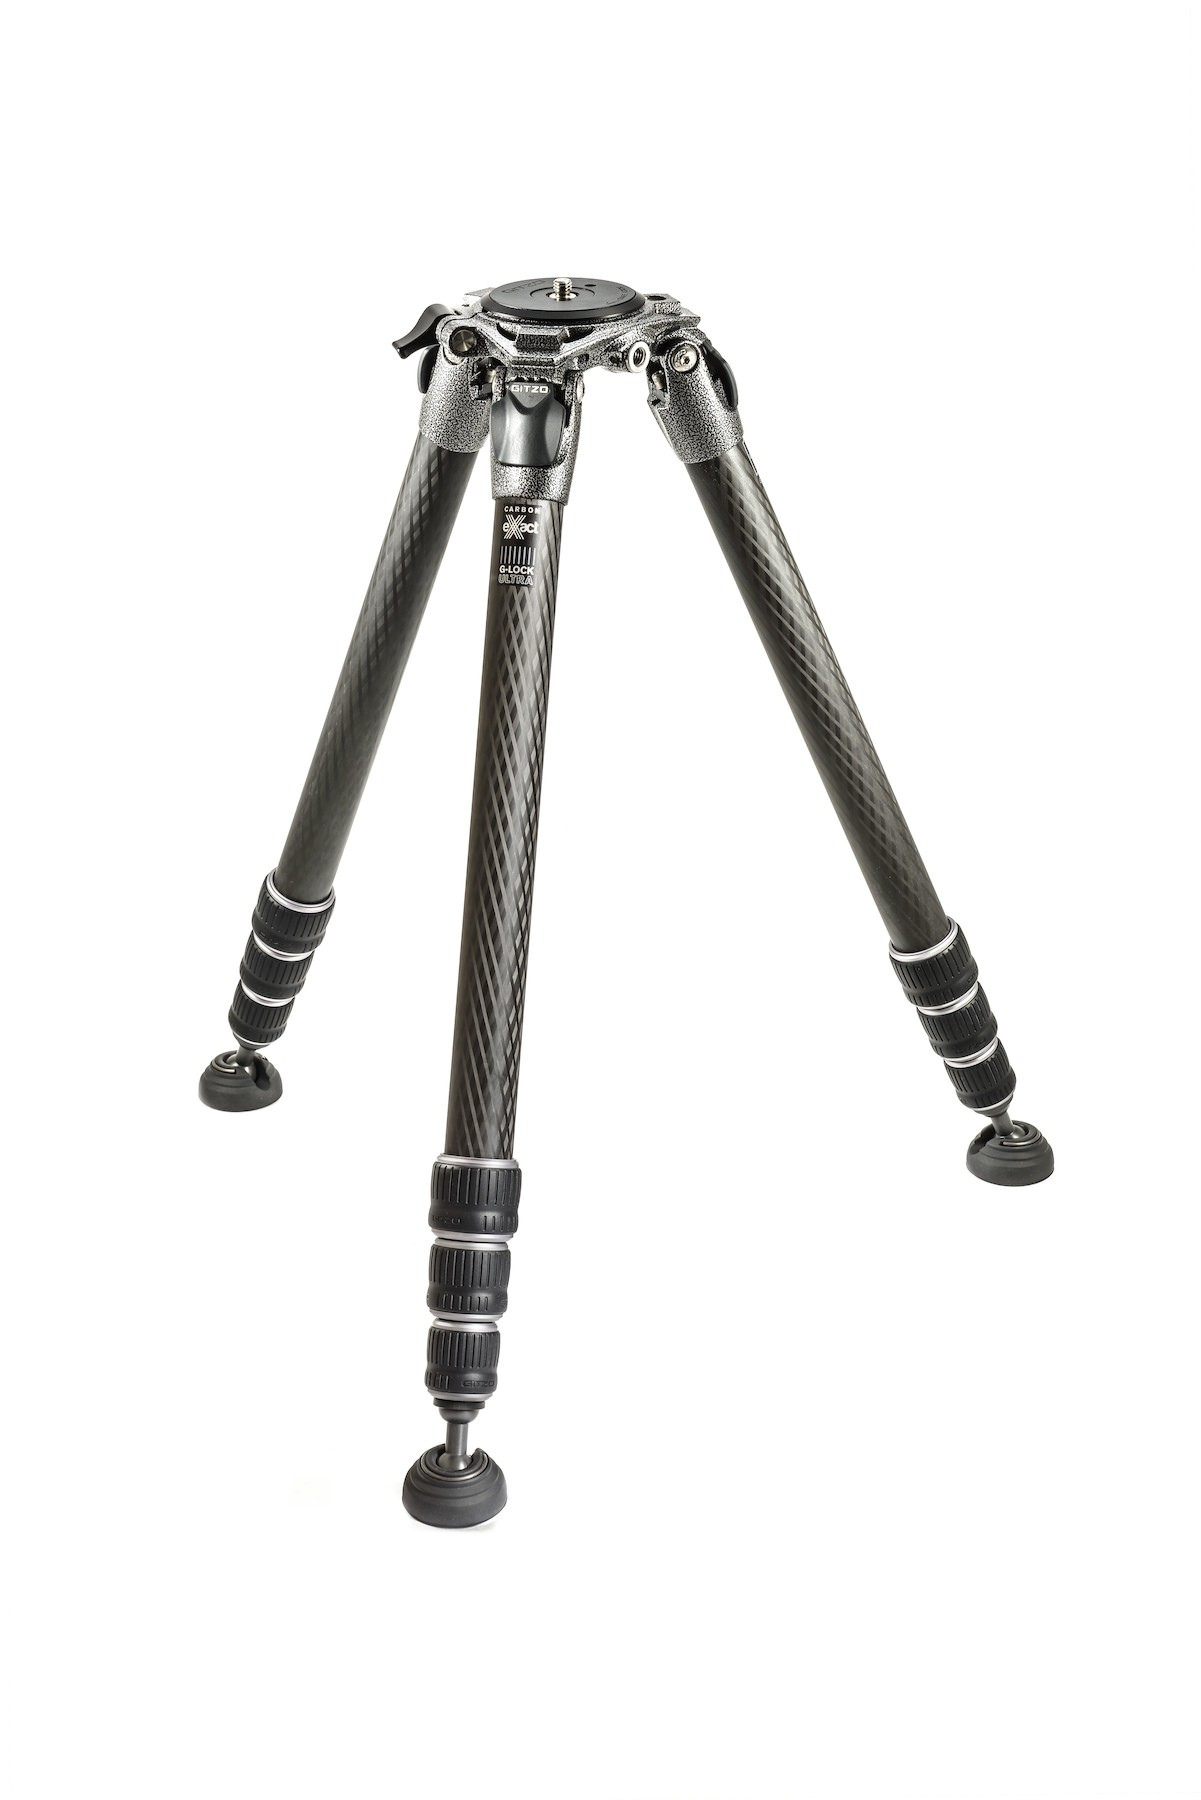 Gitzo tripod Systematic, series 3 long, 4 sections